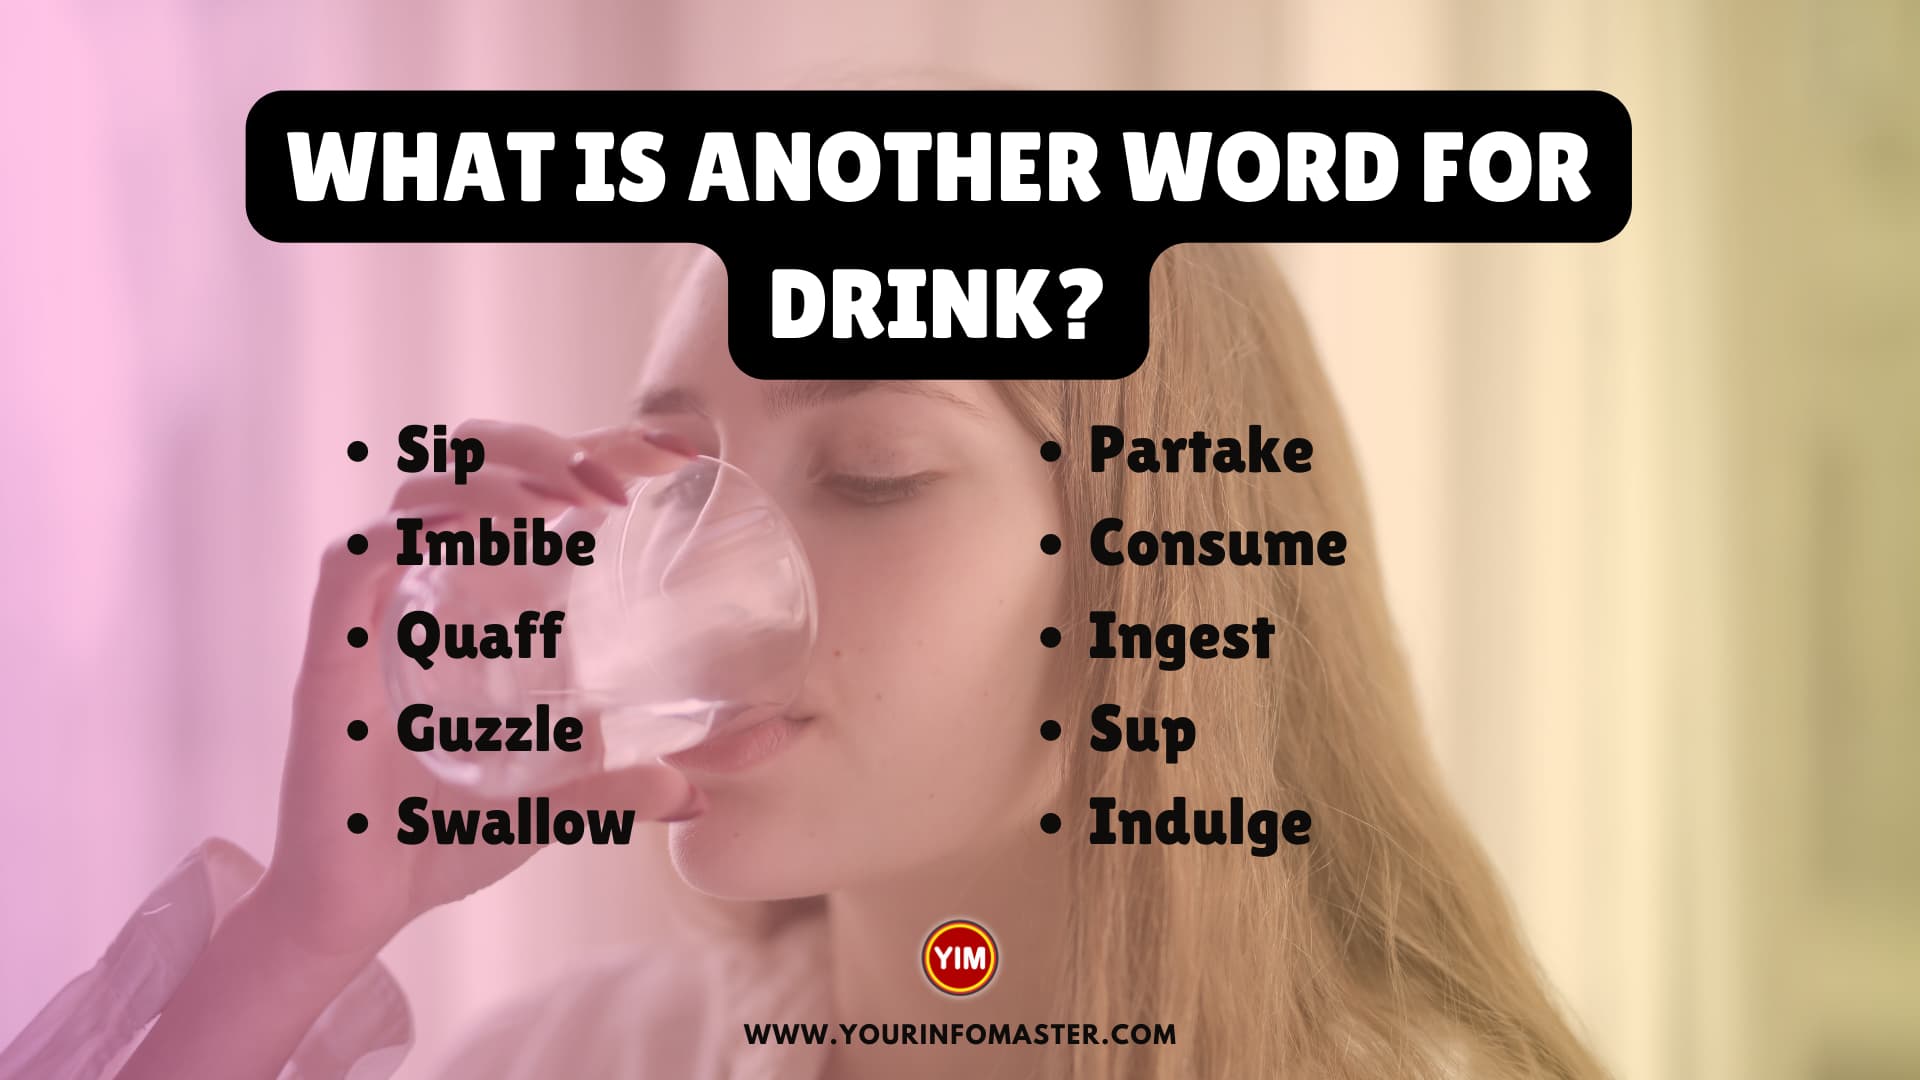 What is another word for Drink